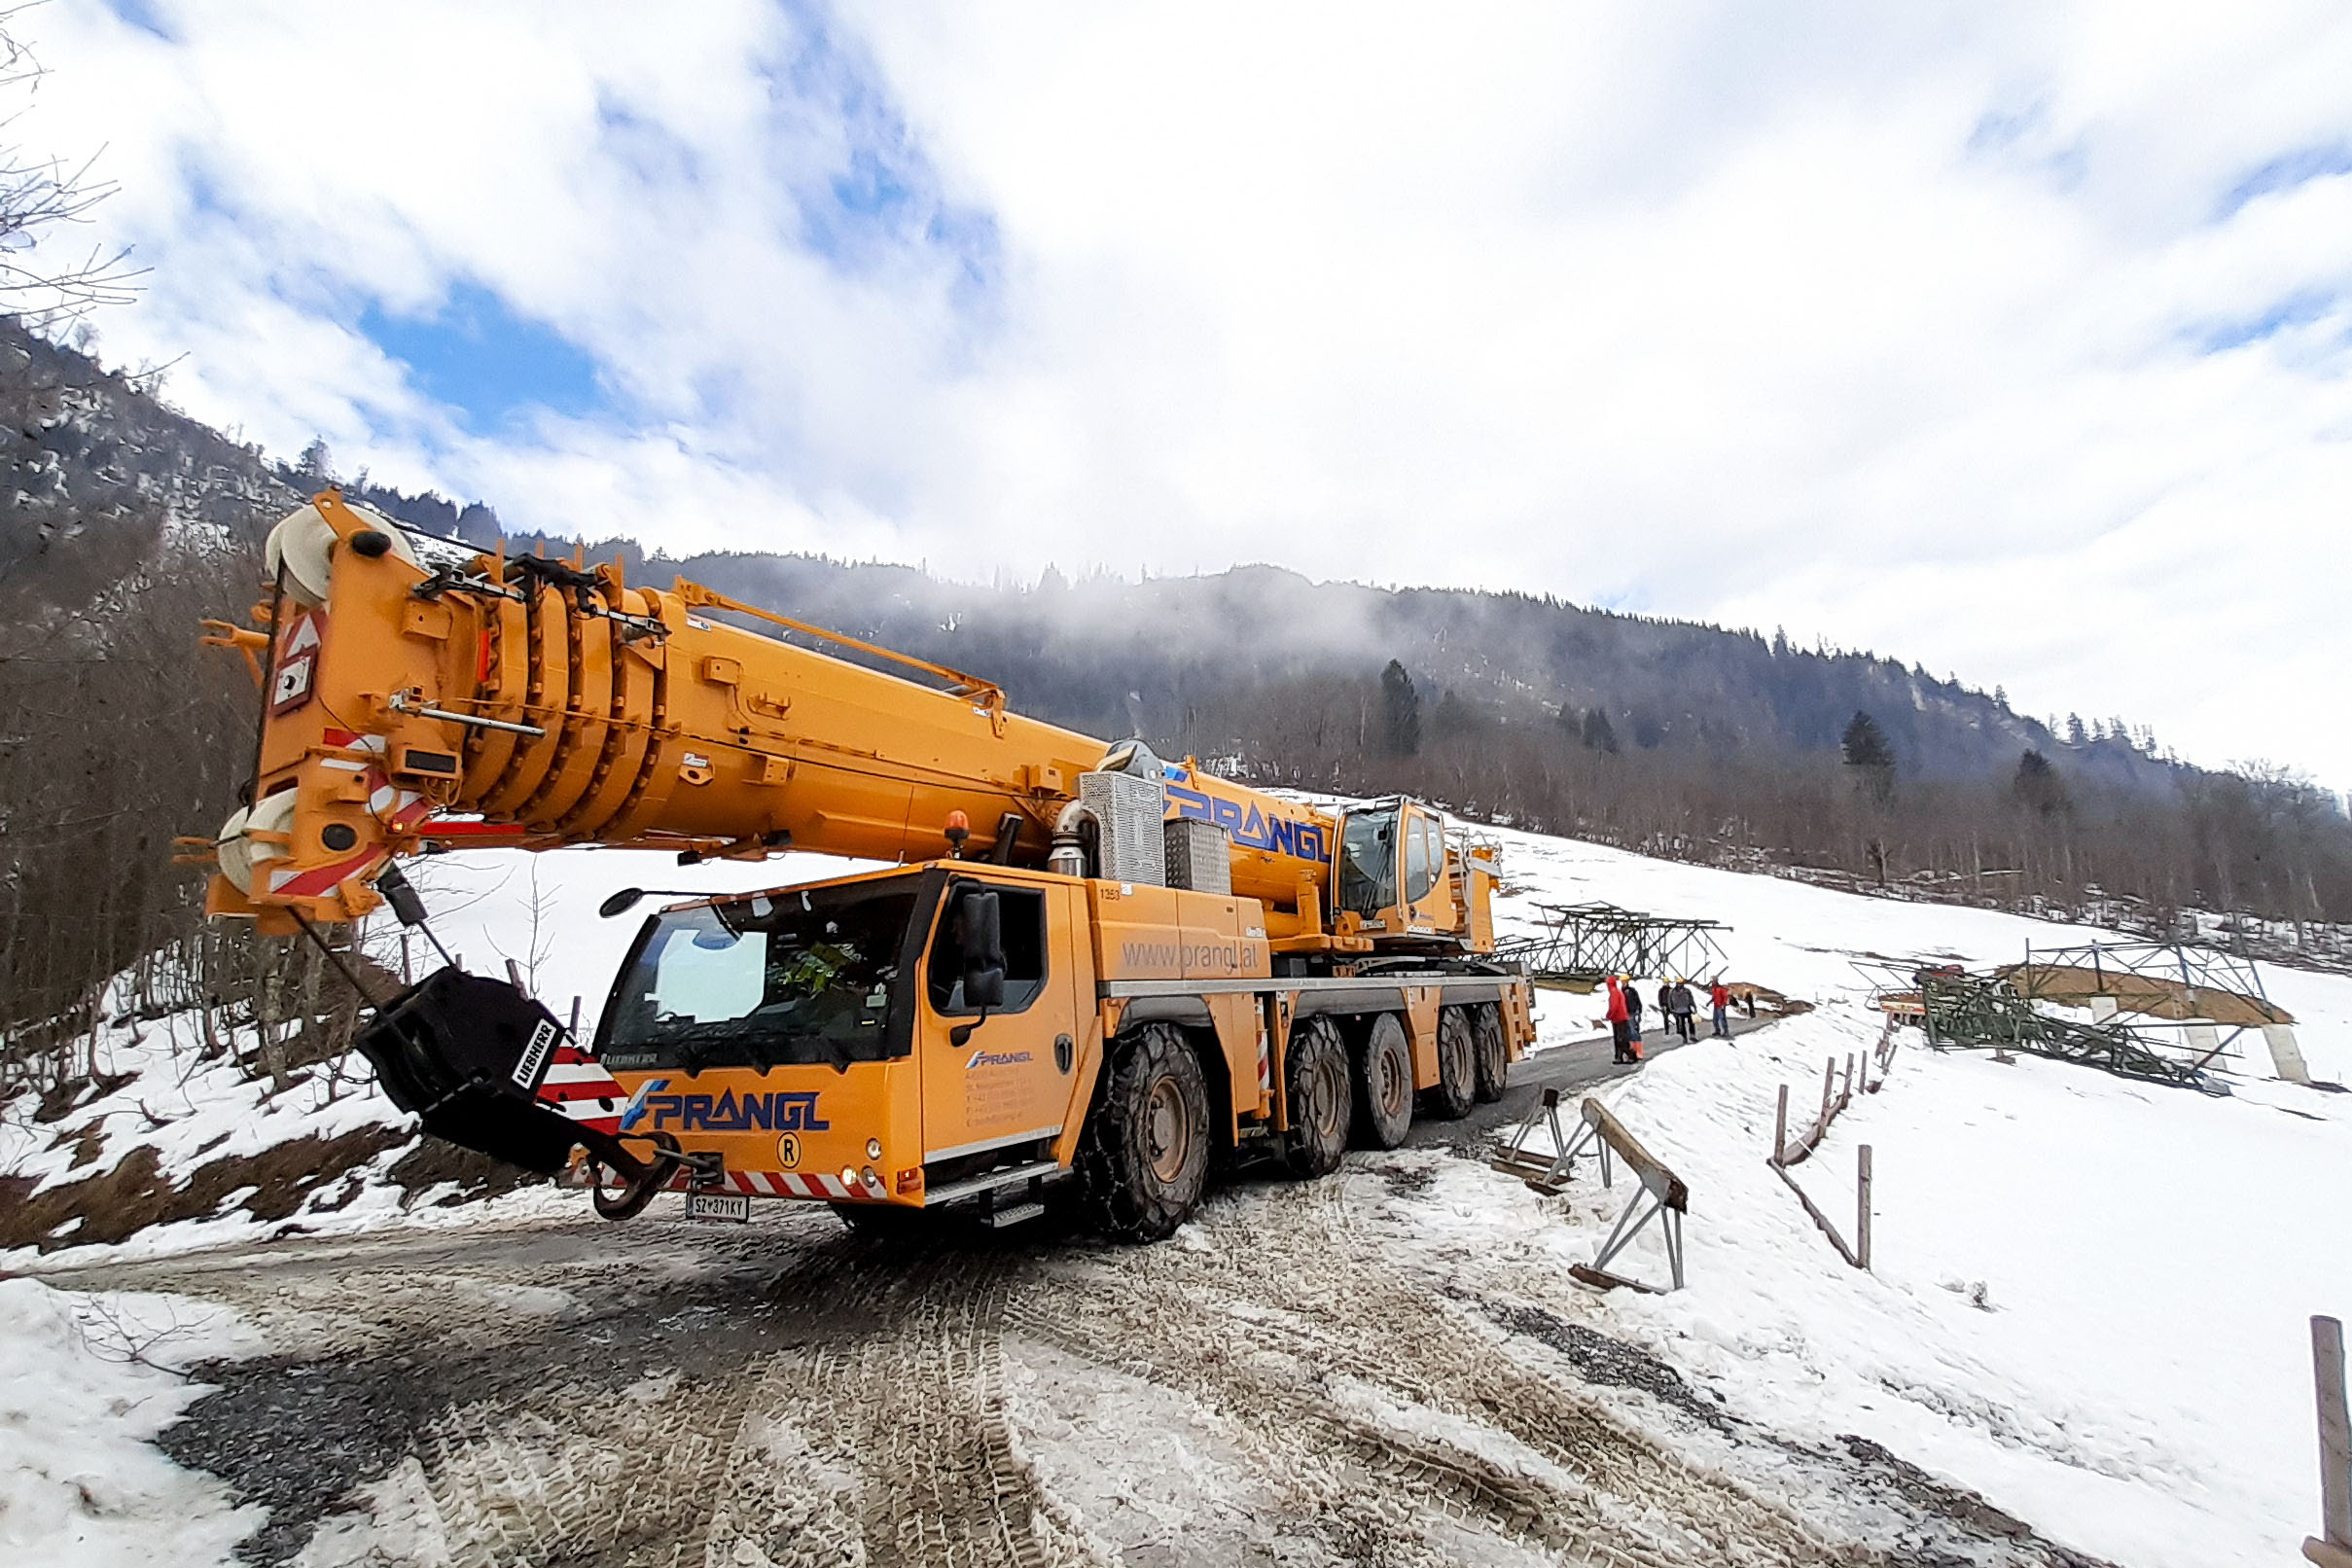 Snow chains – on several occasions the powerful 5-axle crane required snow chains to ensure it could get to the site easily. “We always carry snow chains with us anyway”, says Oliver Thum from Prangl GmbH.